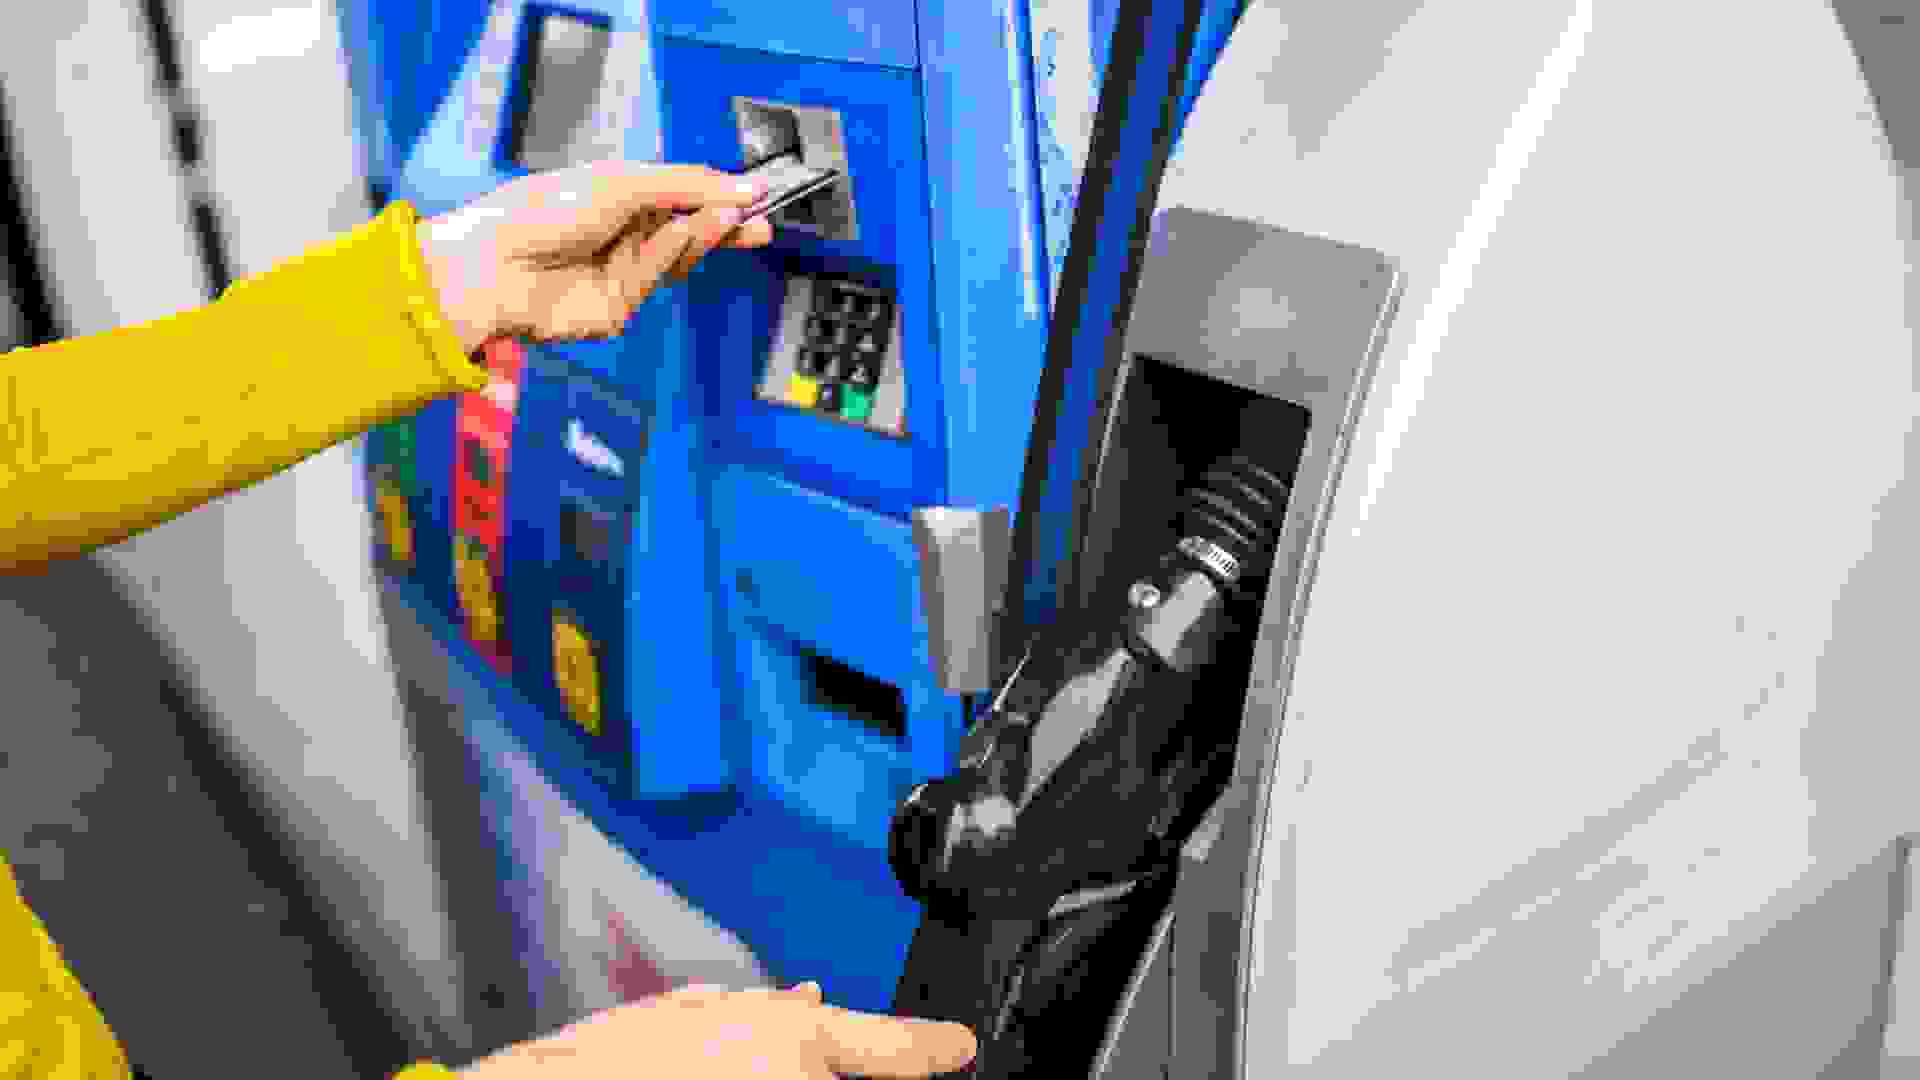 Making a payment for gas at a fuel station.